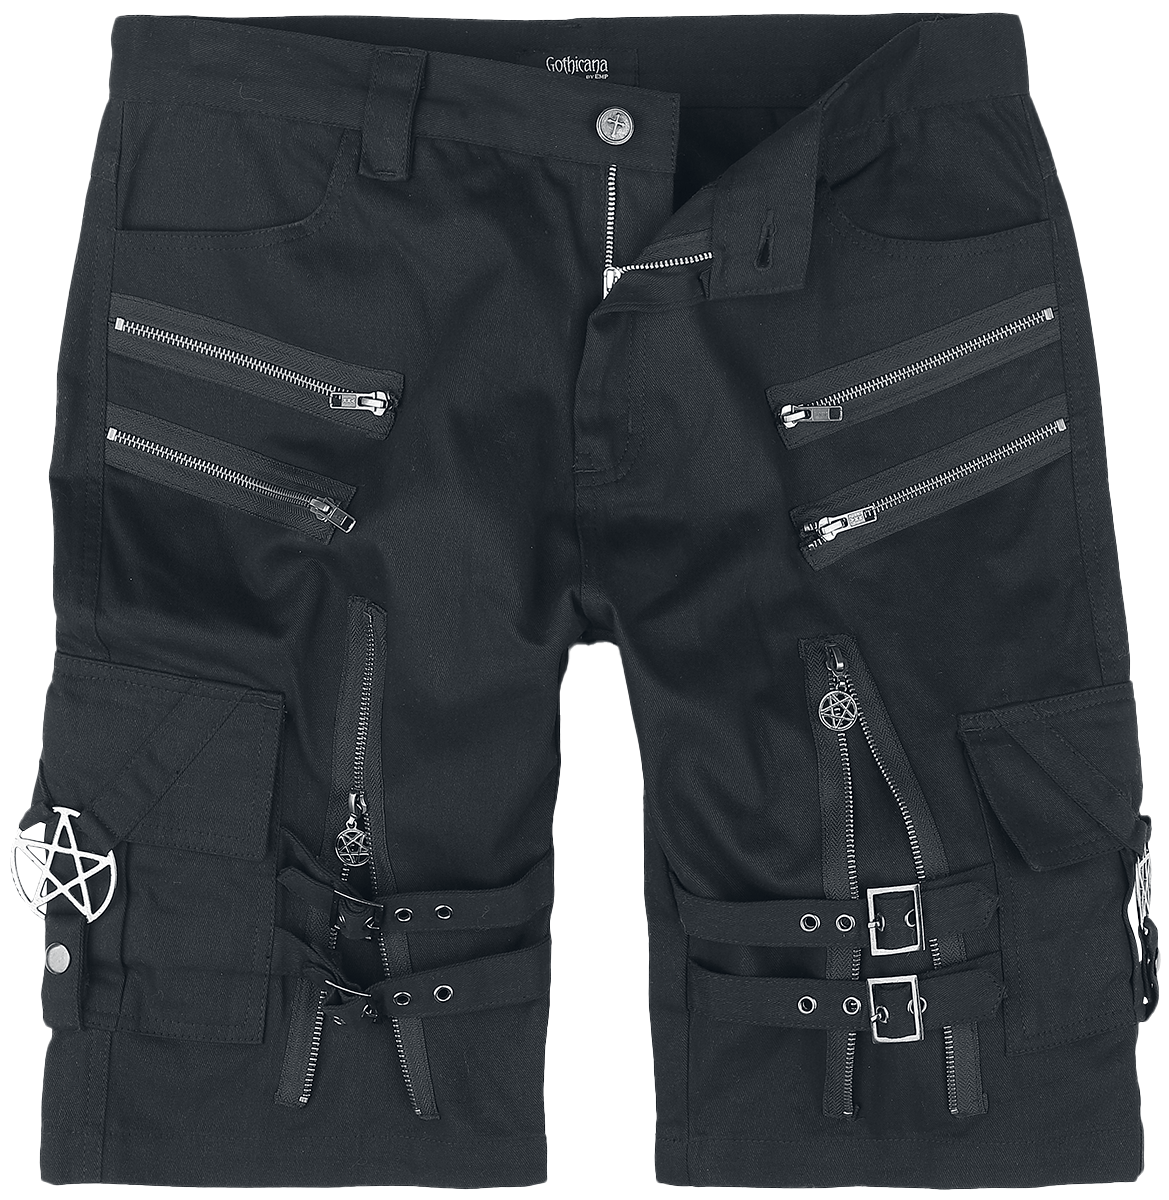 Gothicana by EMP - Shorts with straps buckles and zipper - Short - schwarz - EMP Exklusiv!